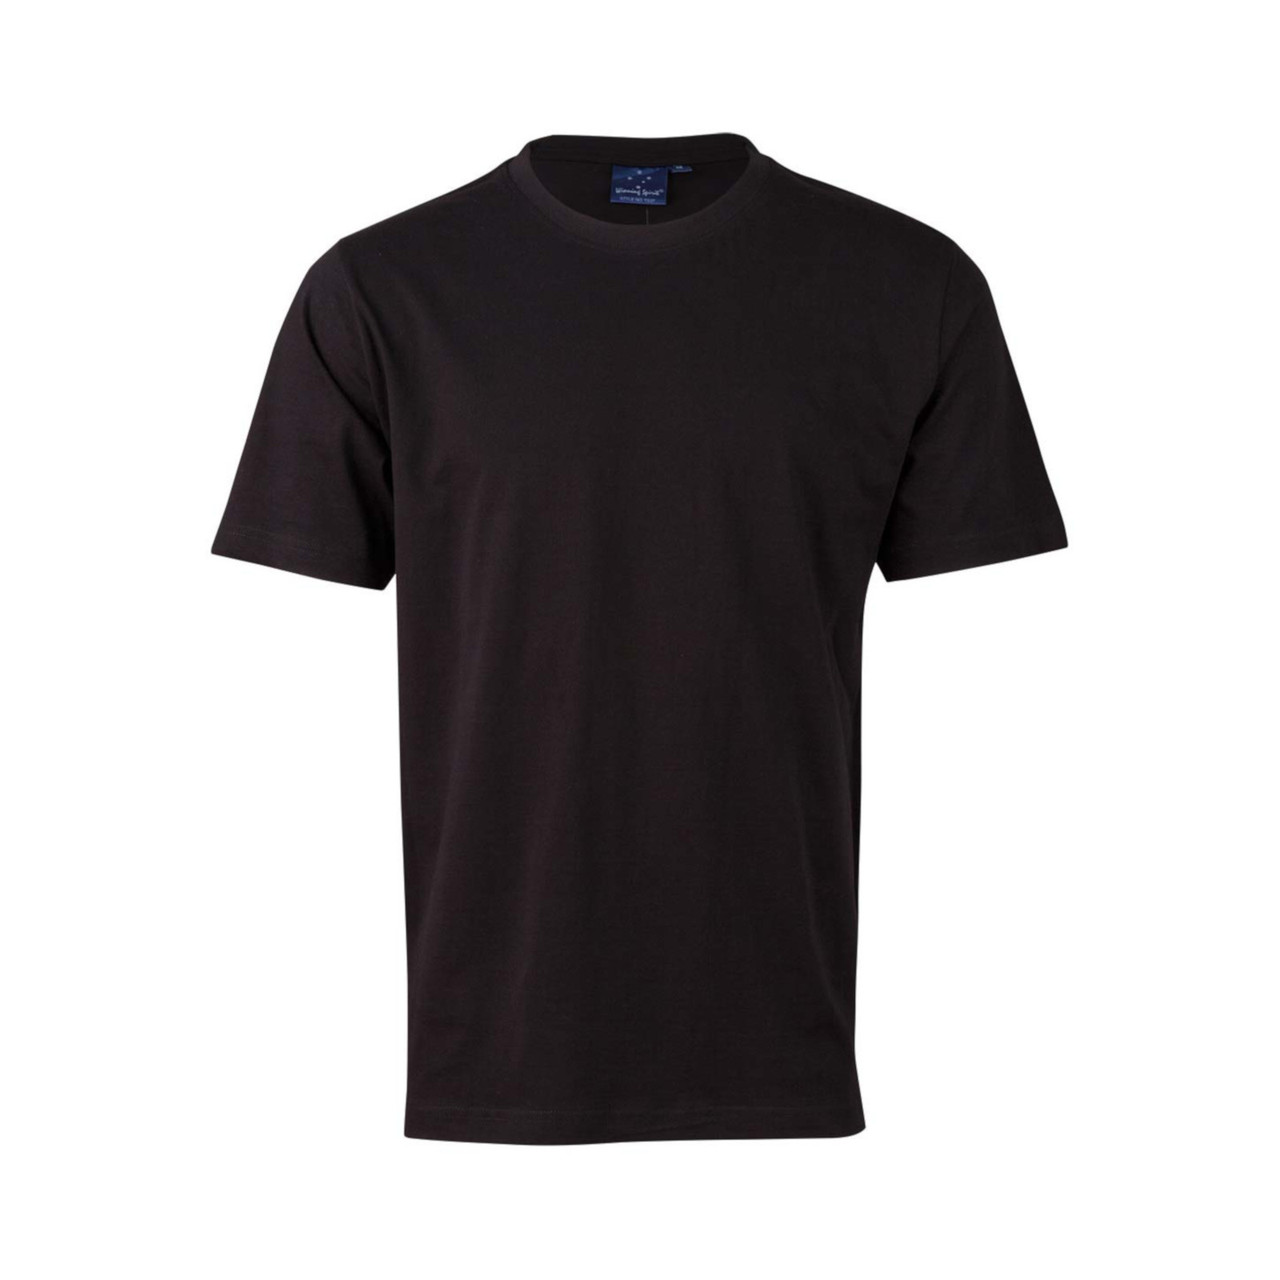 Shop 100% Cotton Semi Fitted Mens Plain Tshirt | Sale on Blank Tees Online